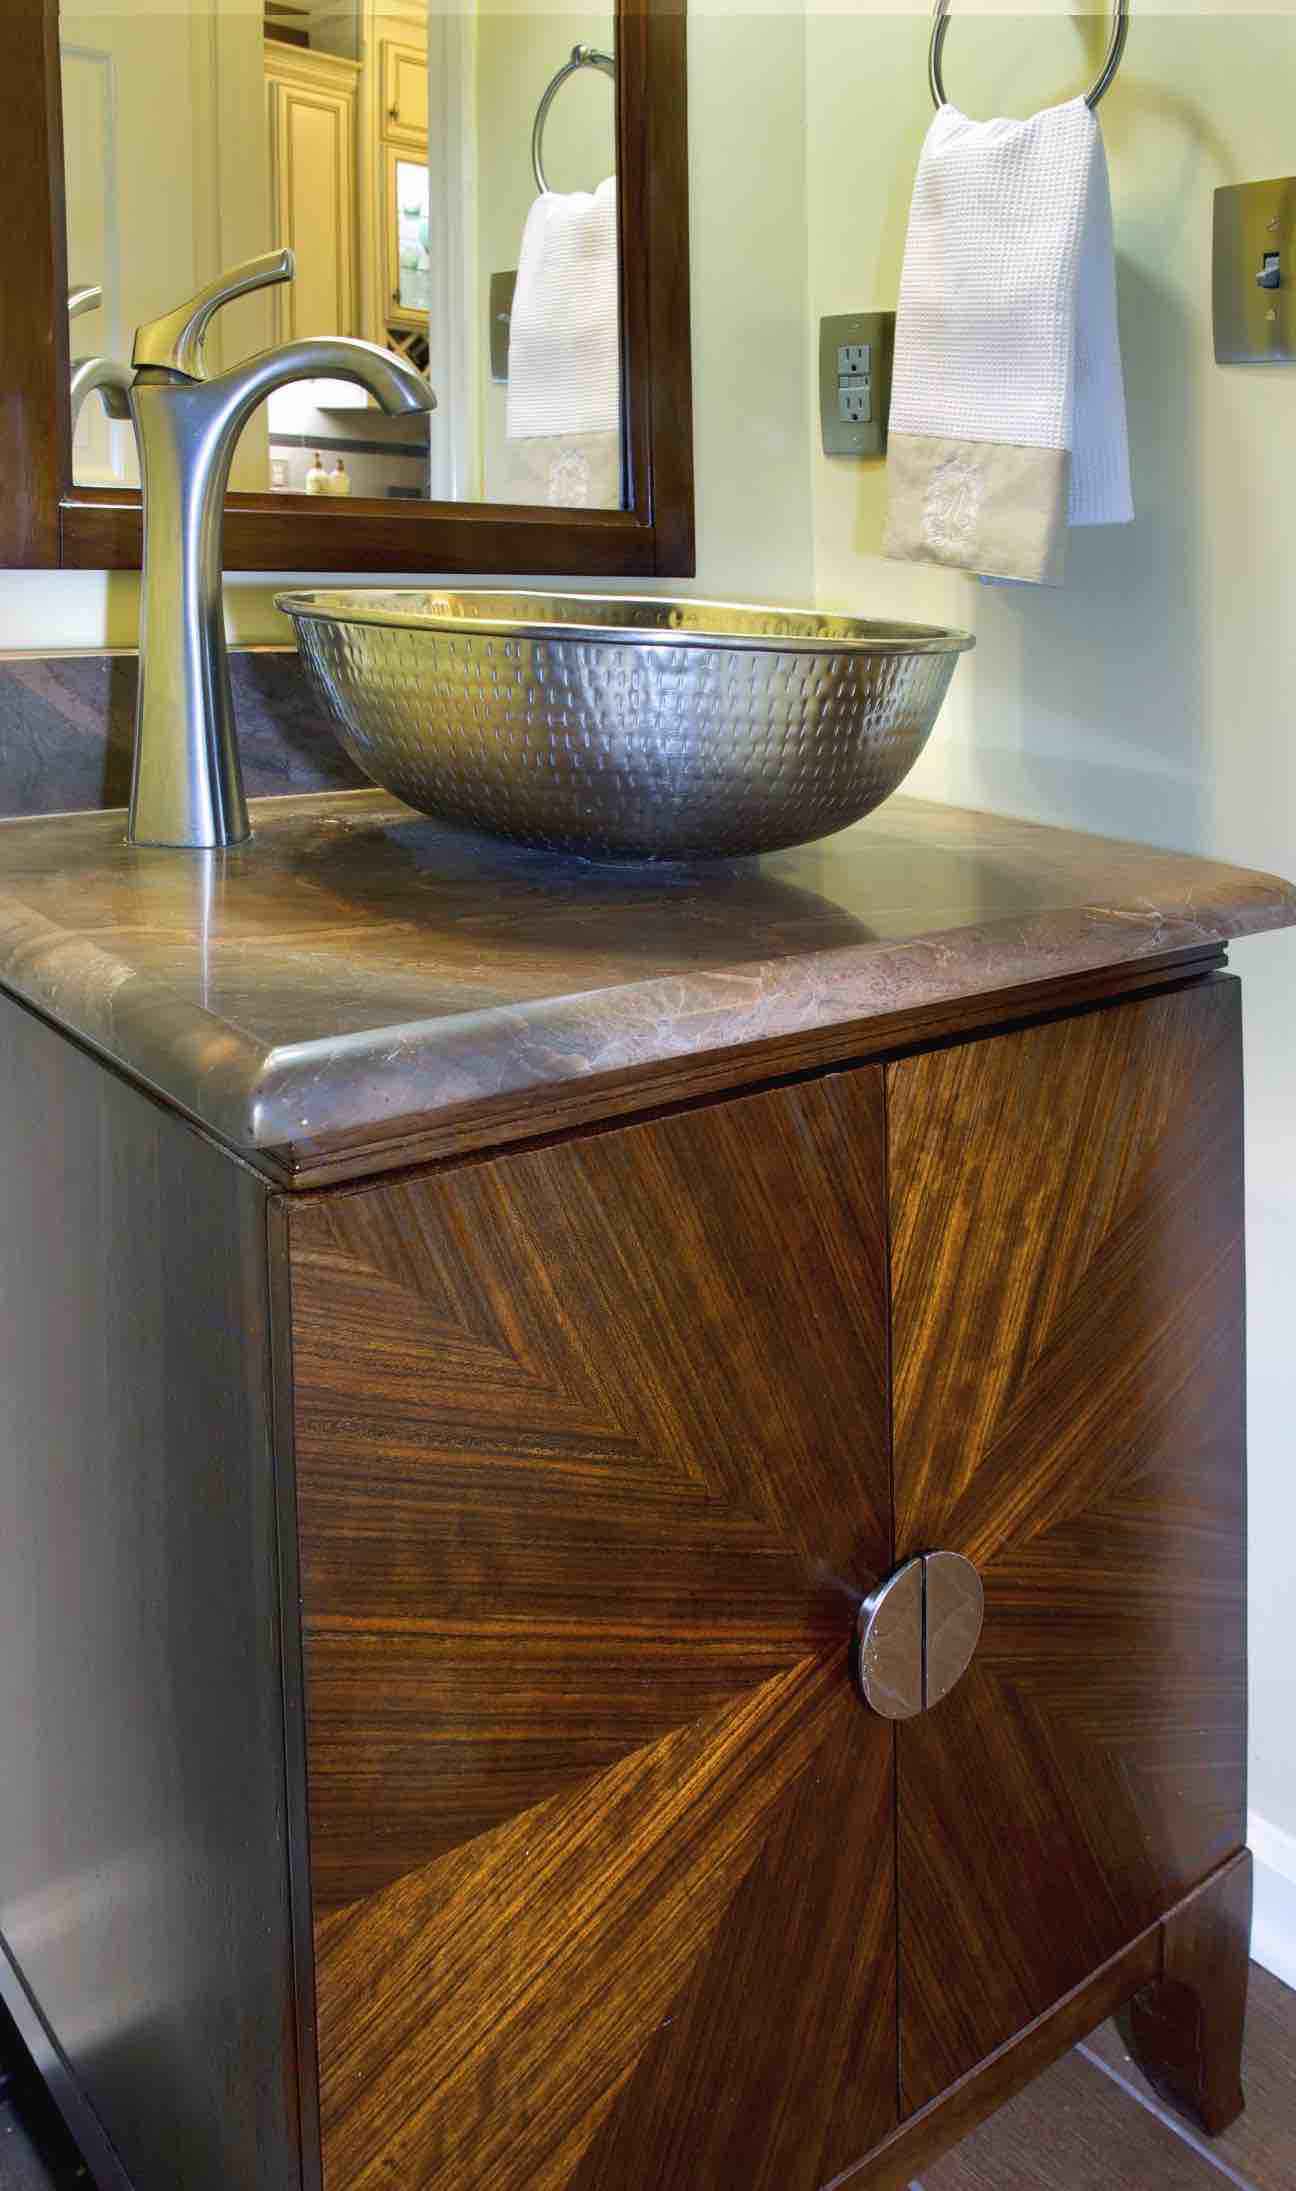 180 Spaces | Interior Design Turnarounds - Power Room remodel featuring hammered vessel sink 